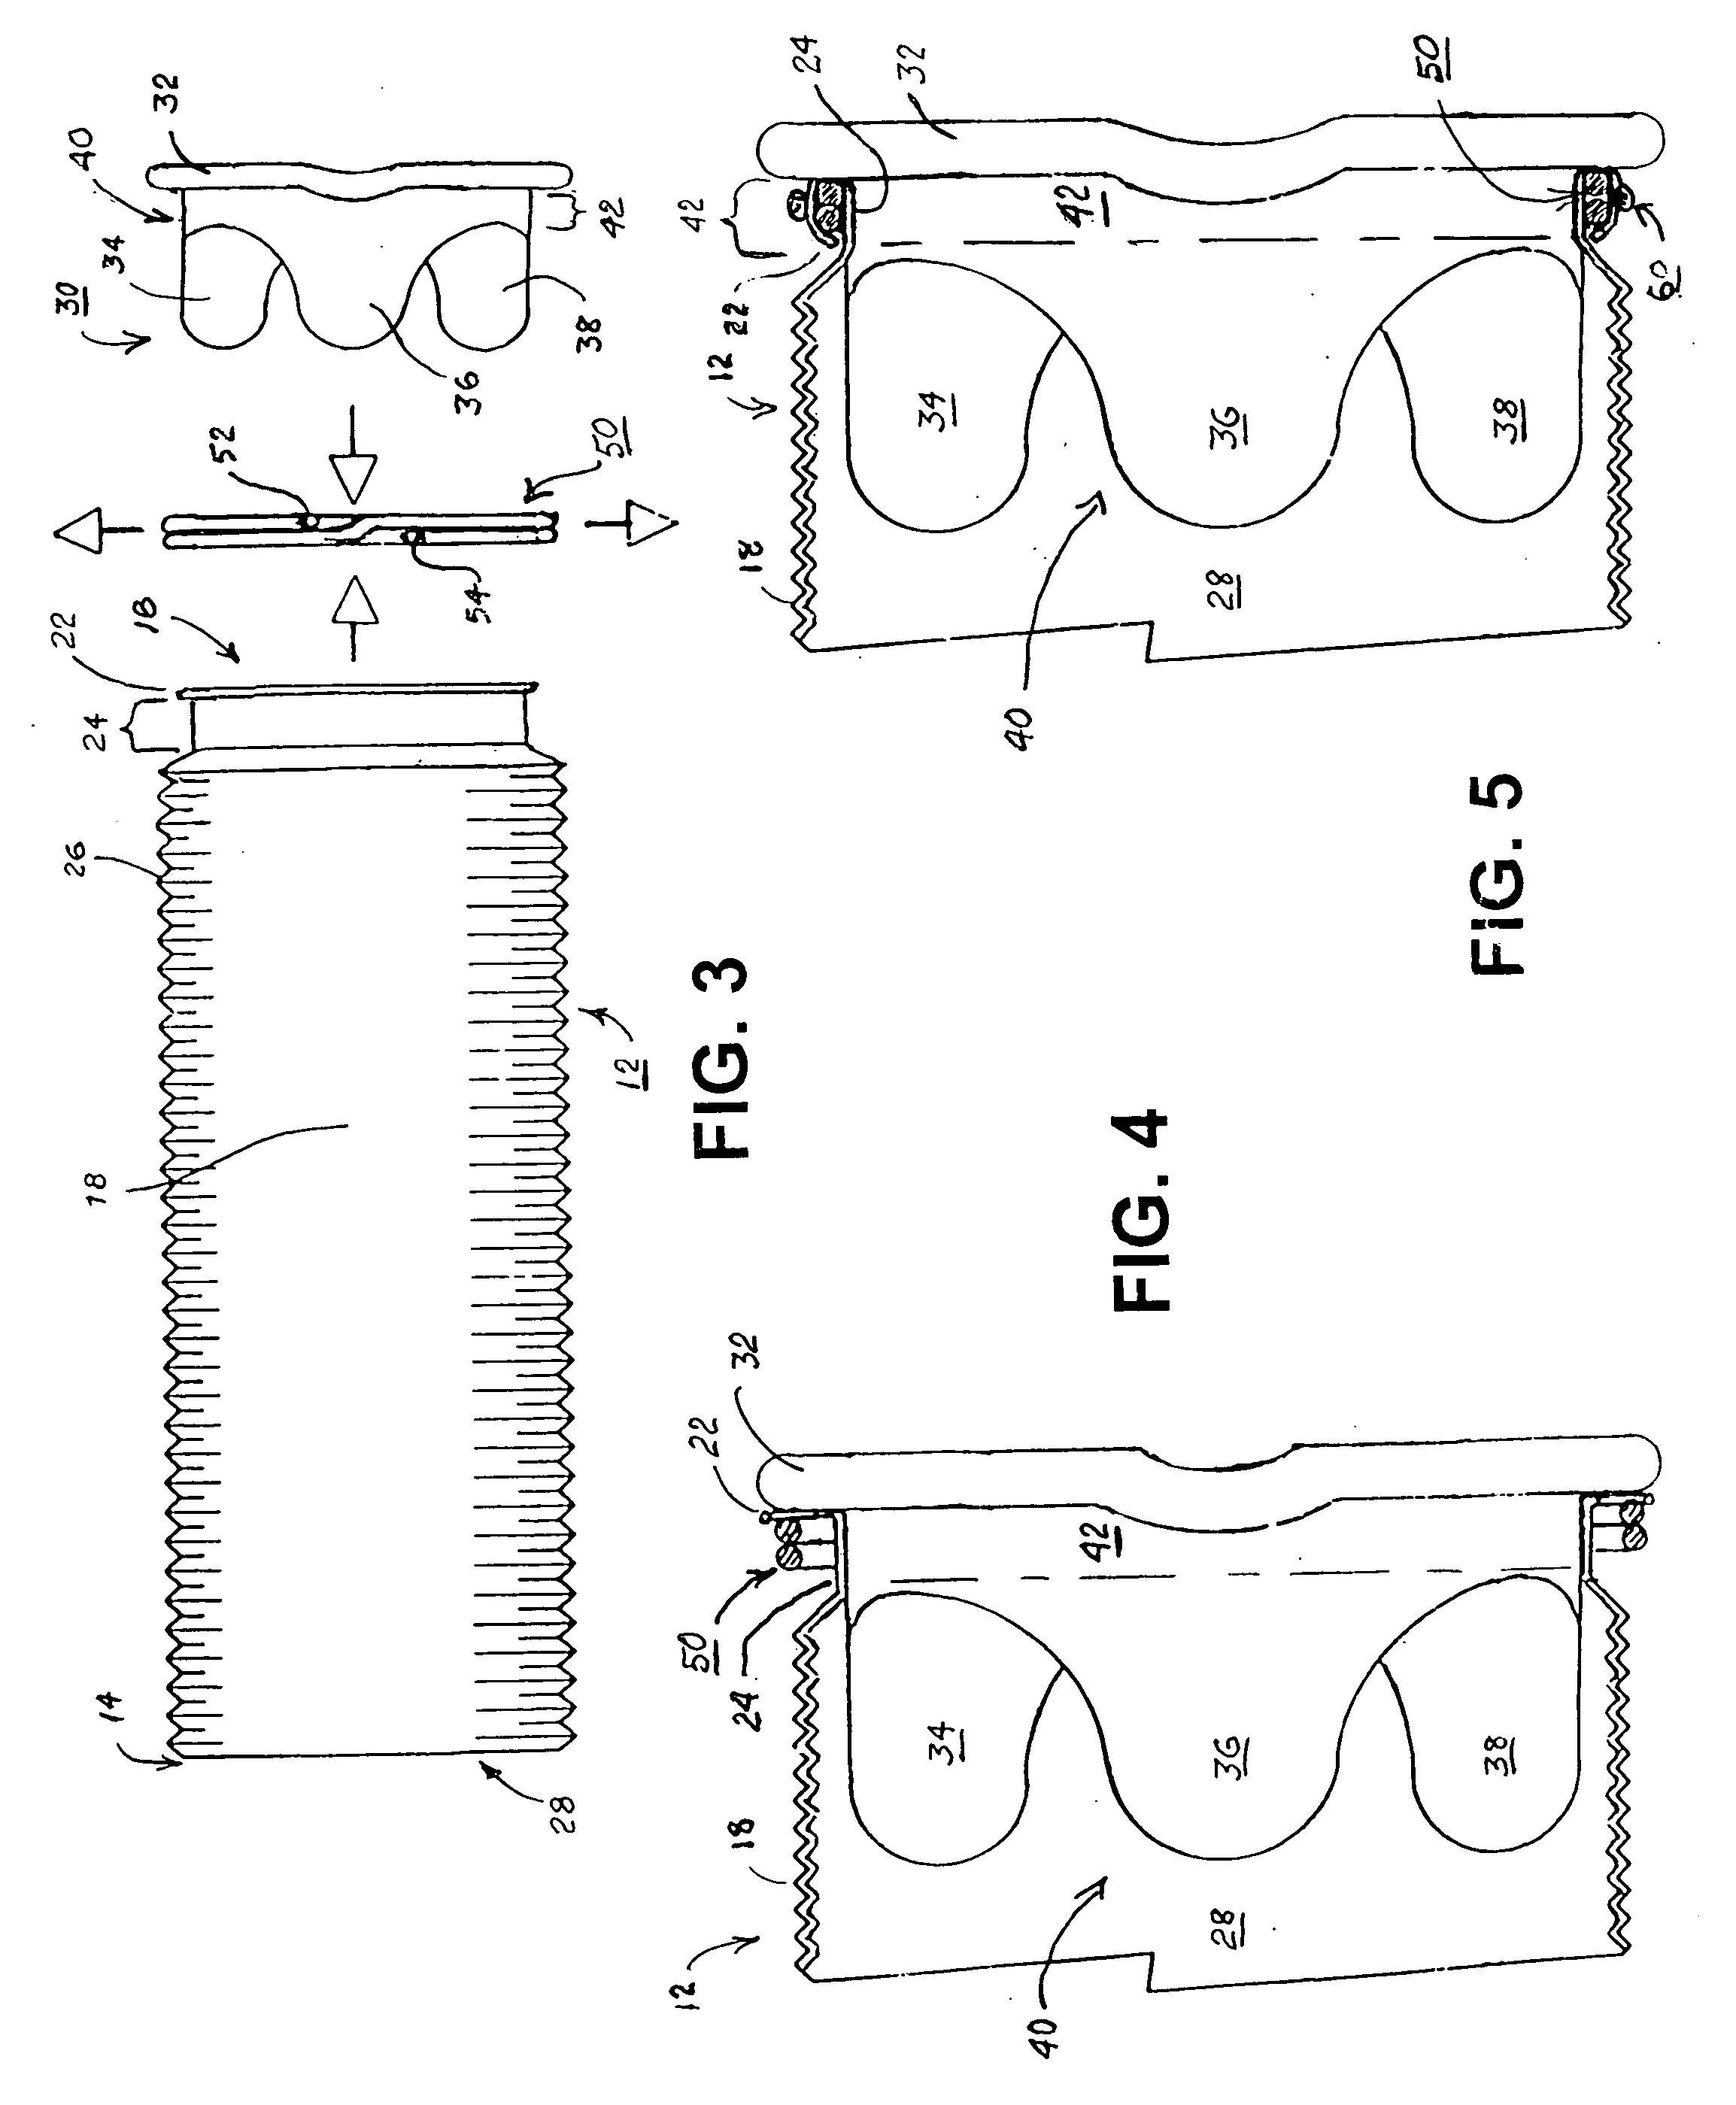 Methods and apparatus for coupling an allograft tissue valve and graft